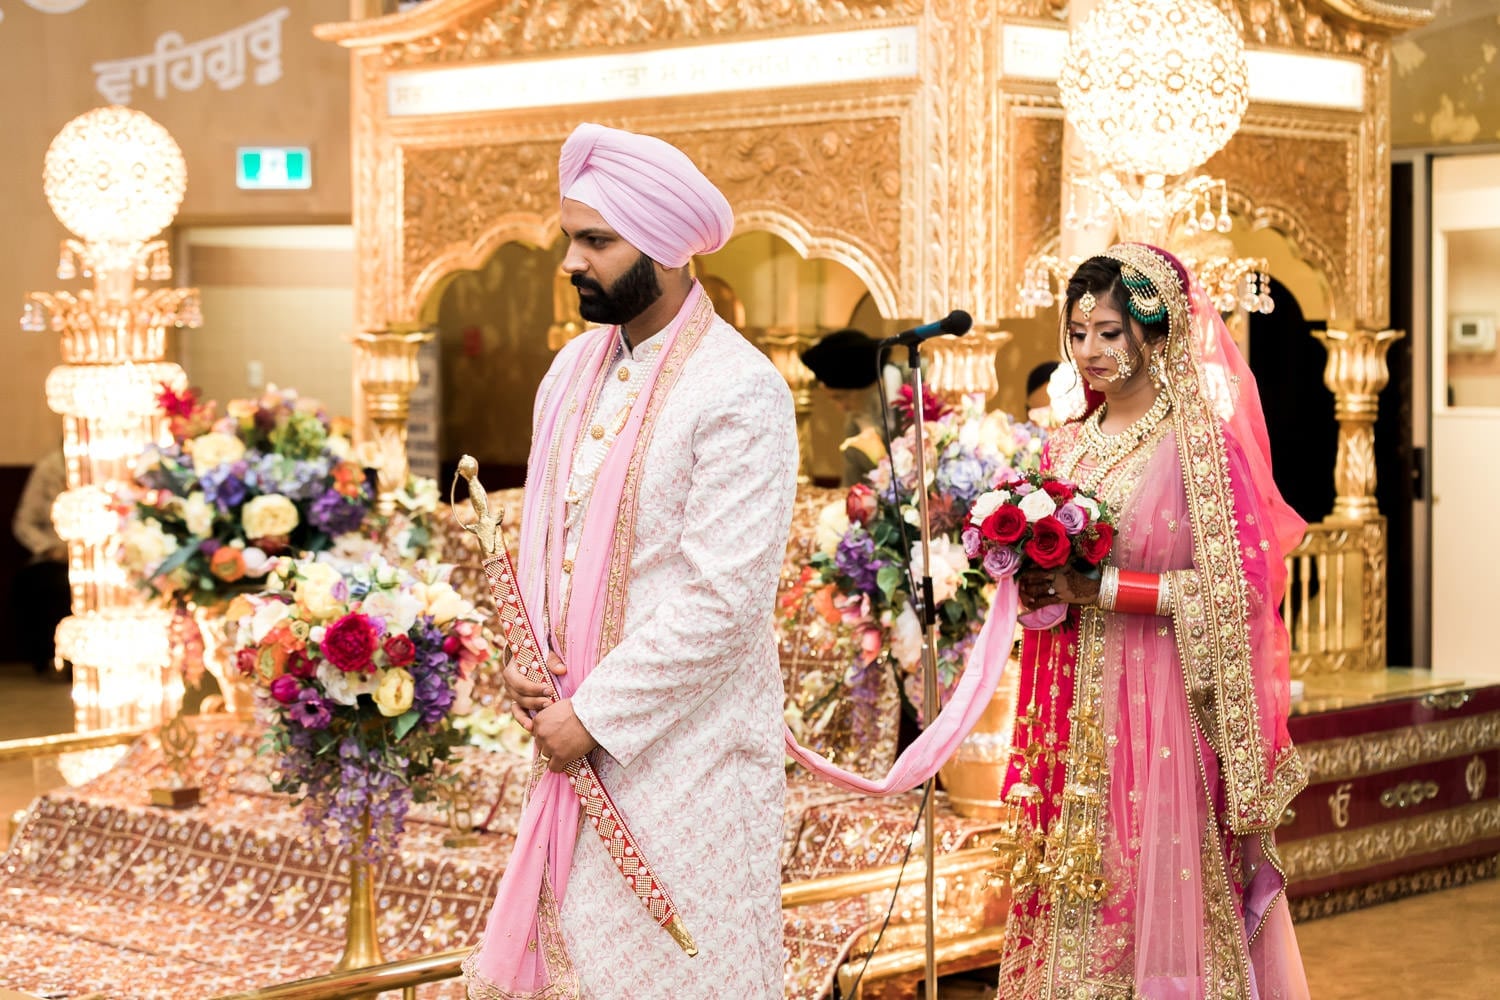 Indian bride and groom at the temple | Indian wedding photography Vancouver